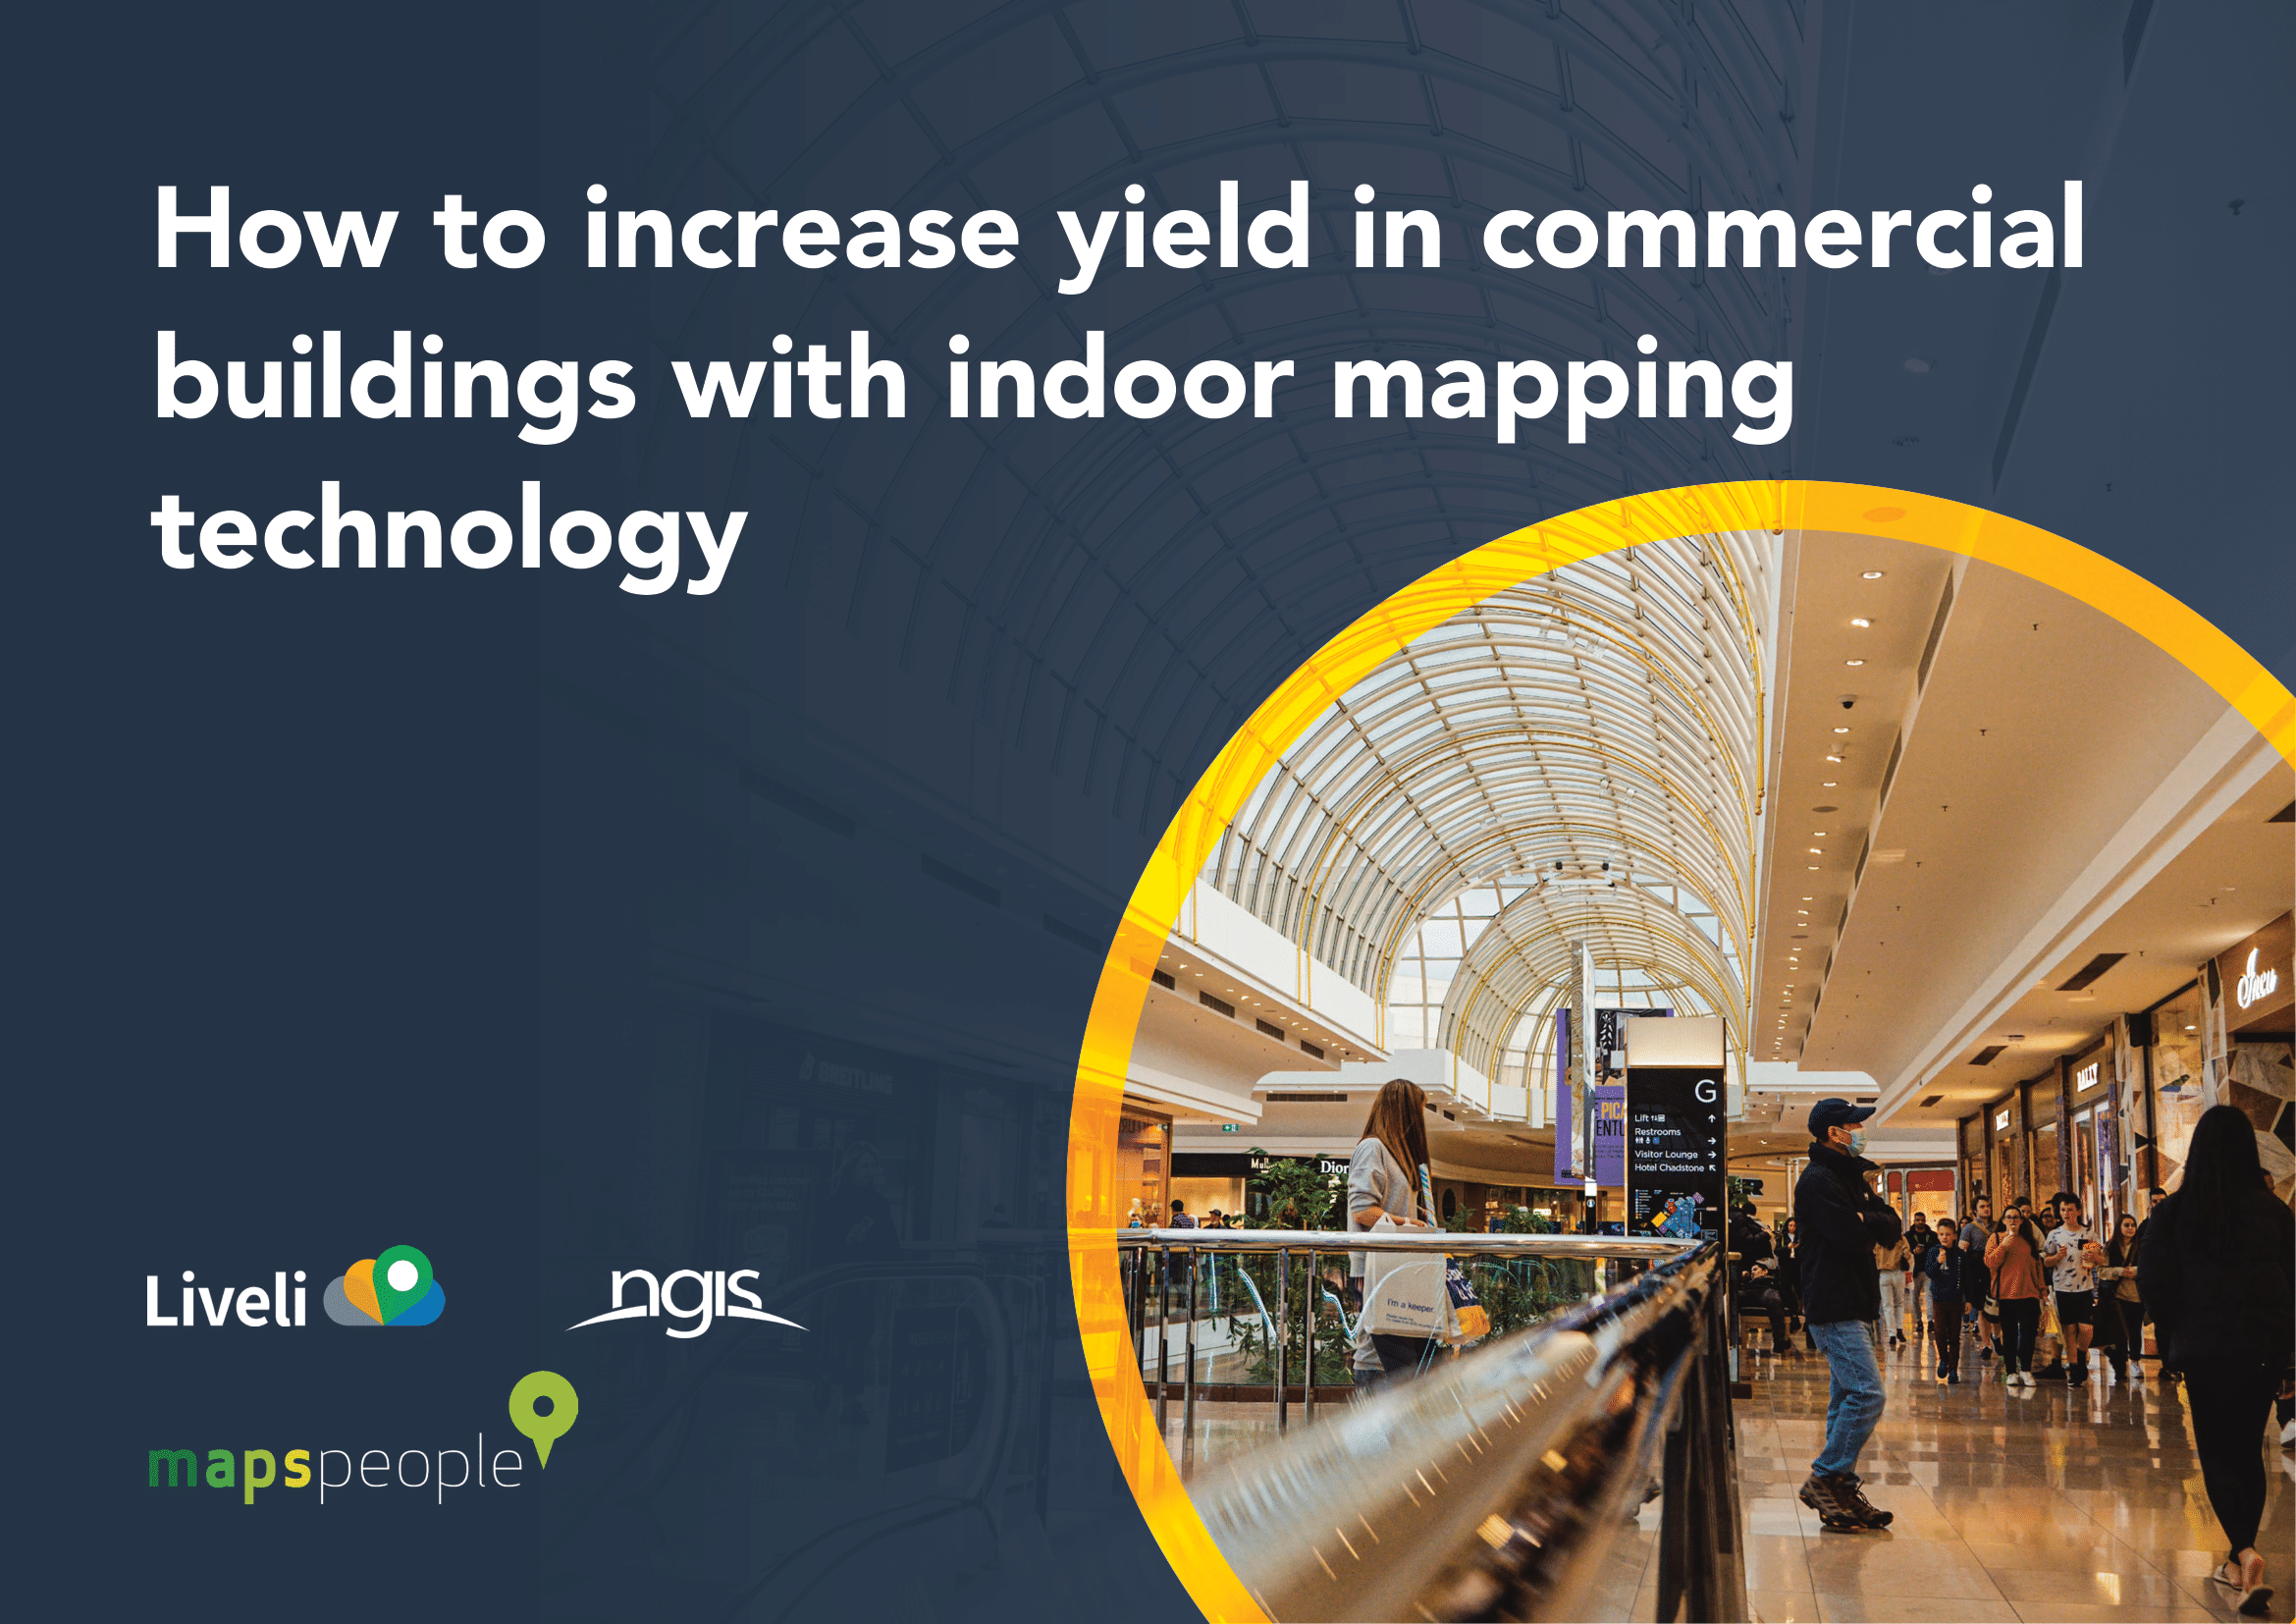 How to increase yield in commercial buildings with indoor mapping technology